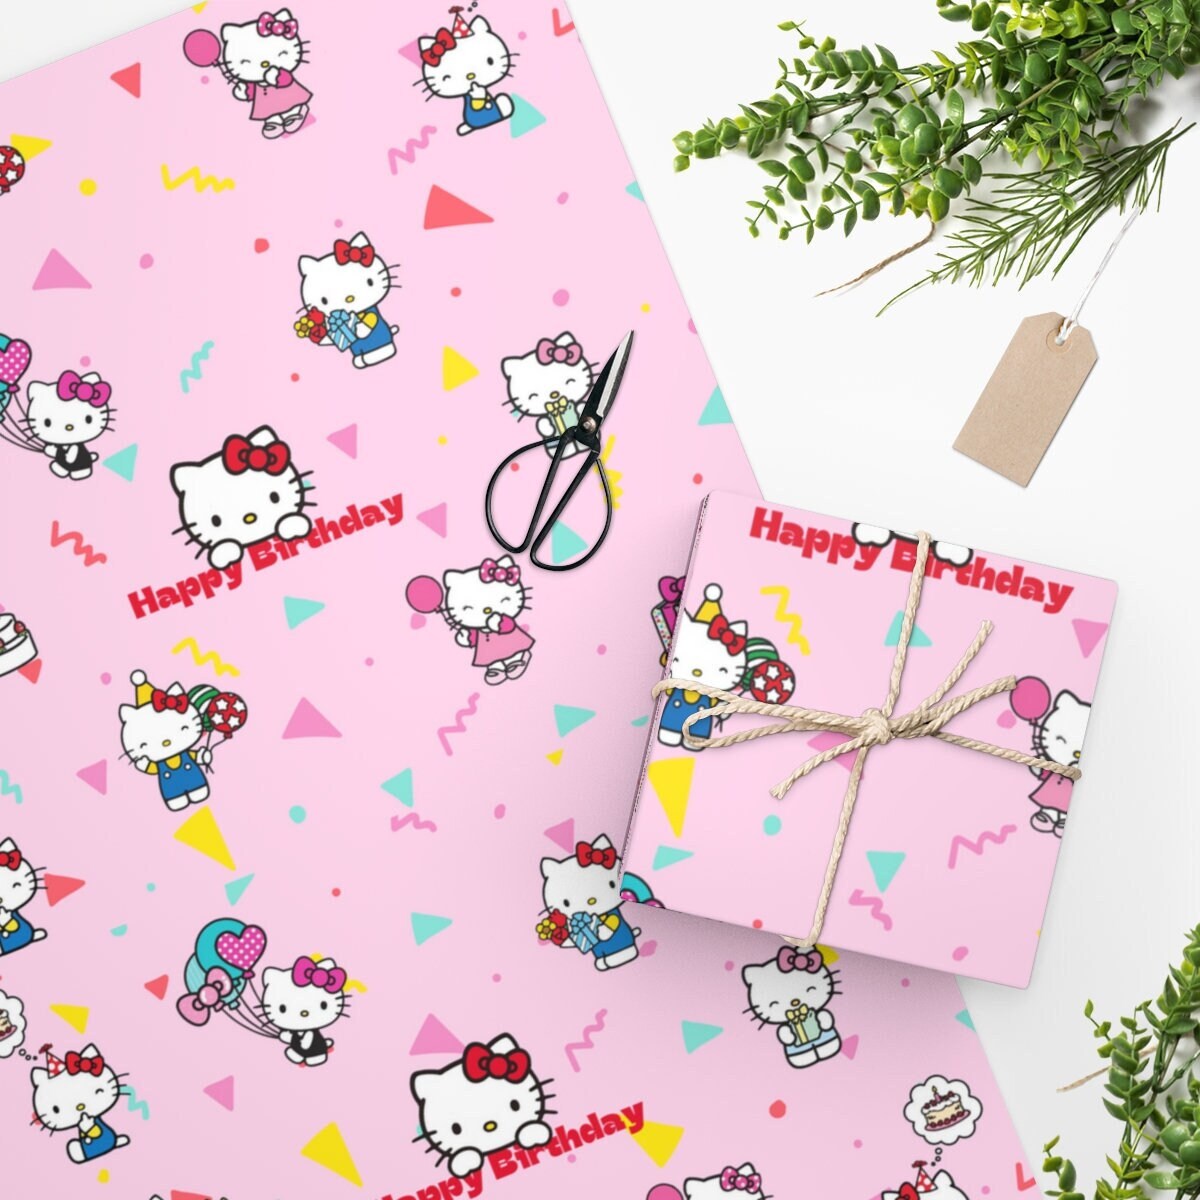 Cute Sanrio puppy from Hello kitty Poster by Rolling Star